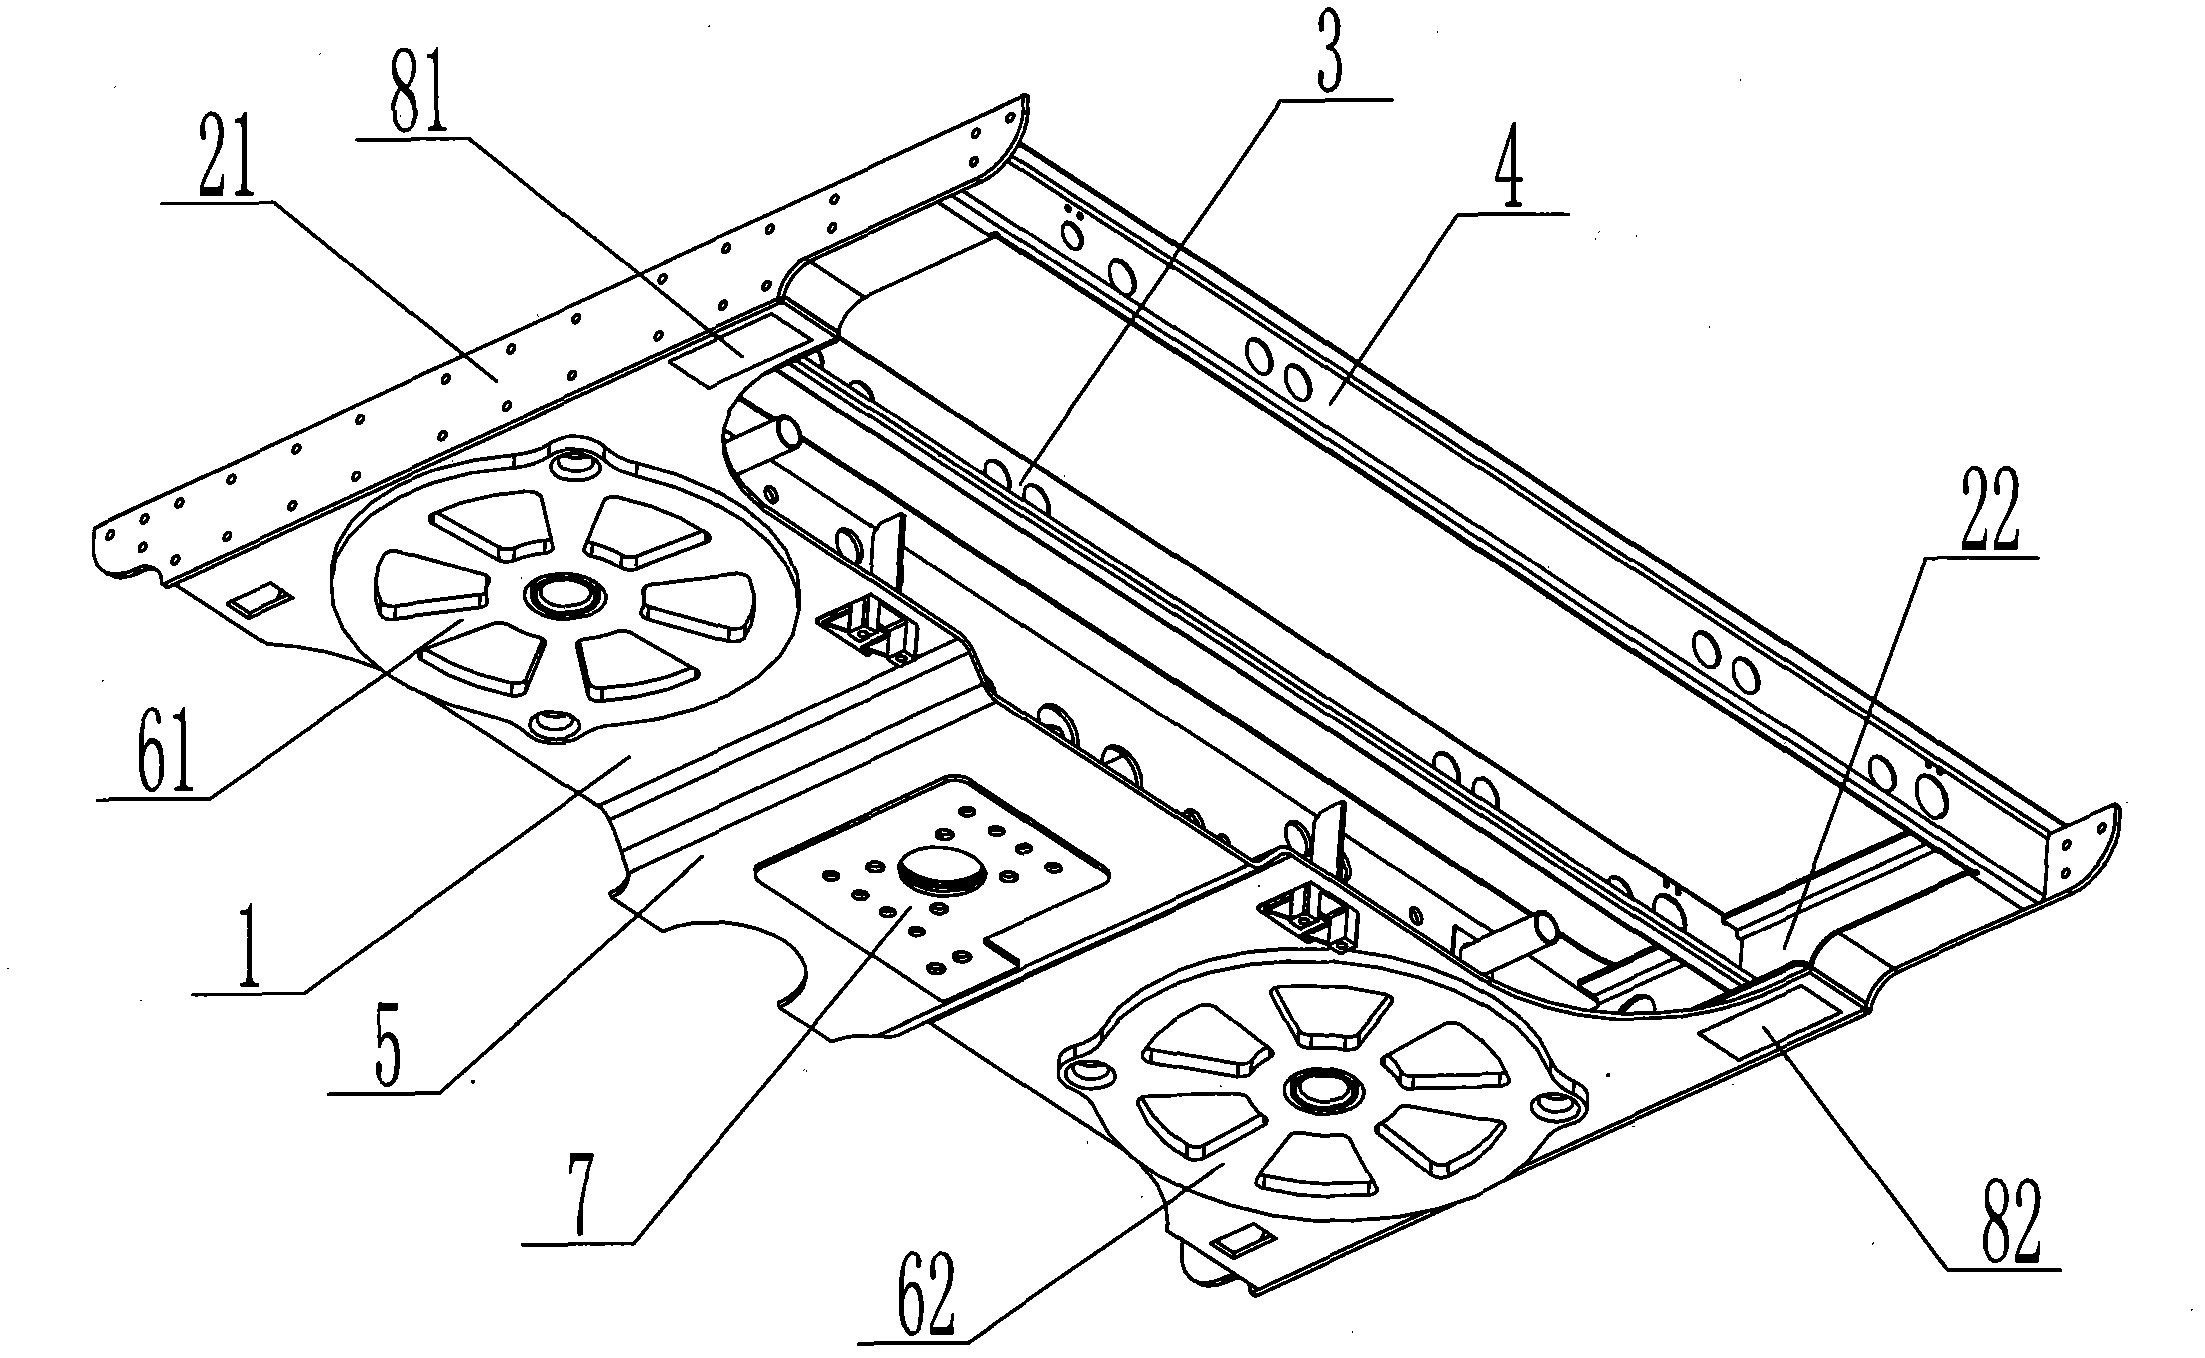 Process for producing modular sleeper beam for railway carriage